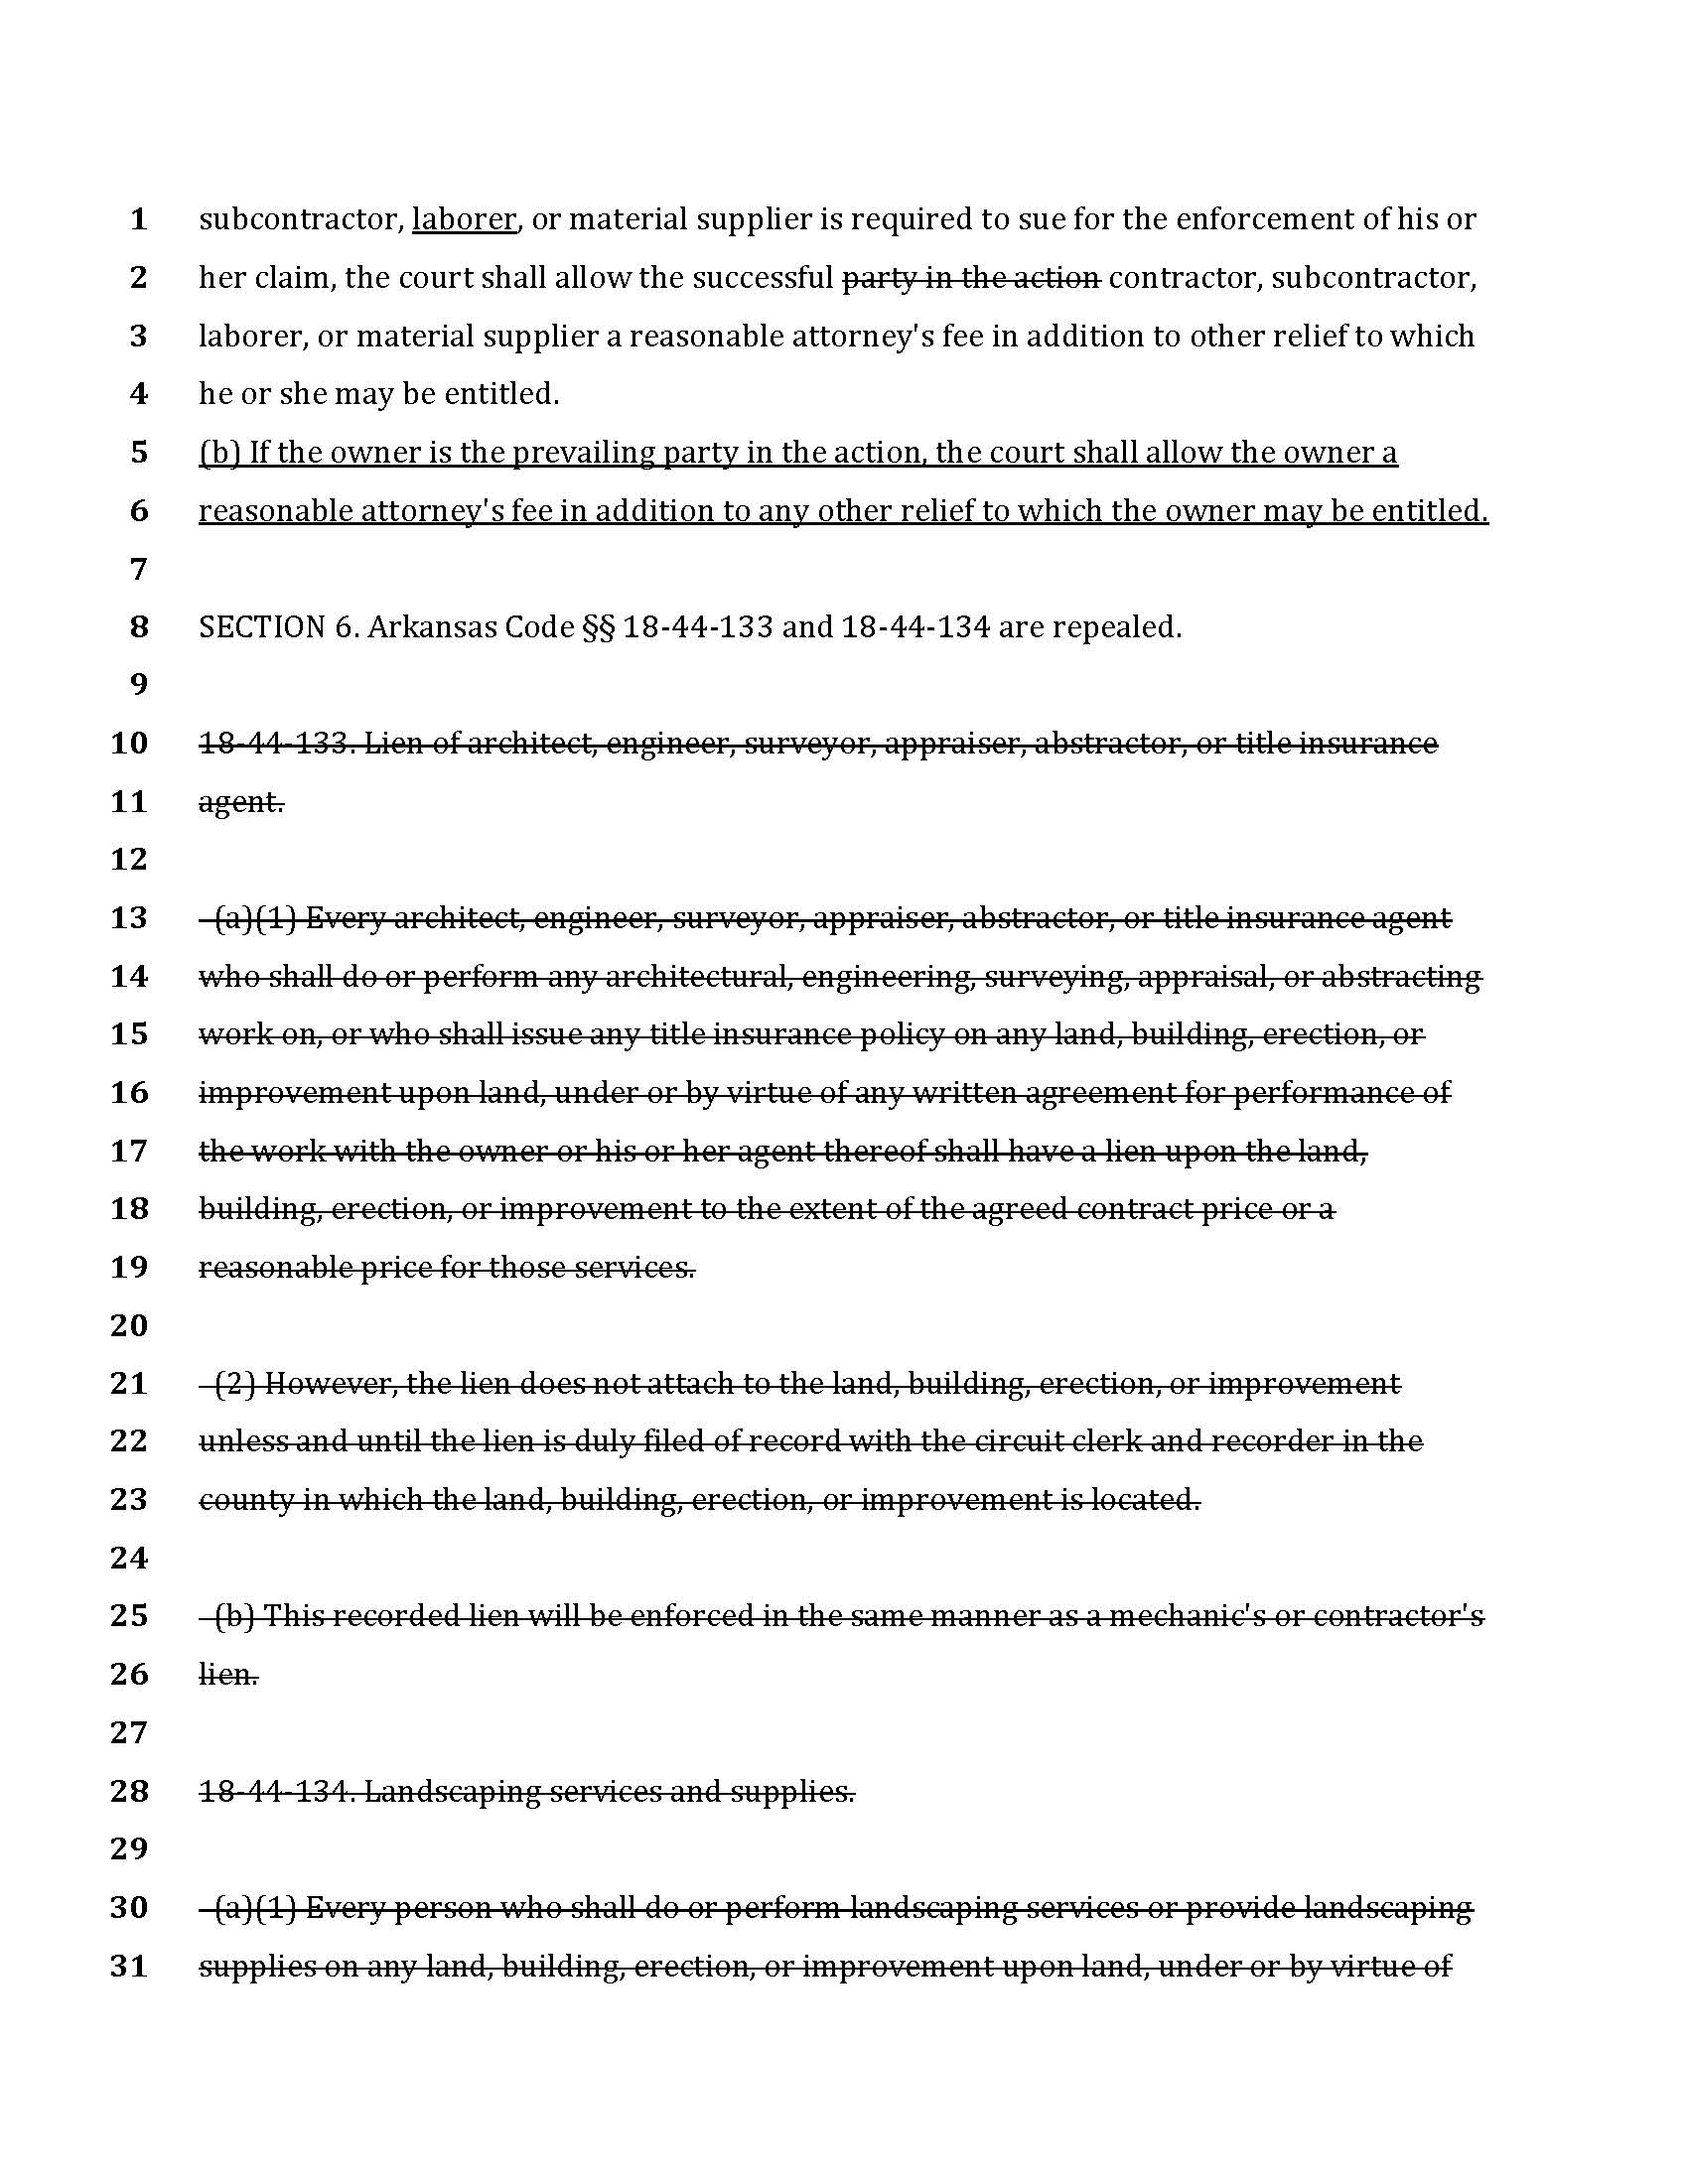 final-bill-lien-law-revisions_Page_15.jpg